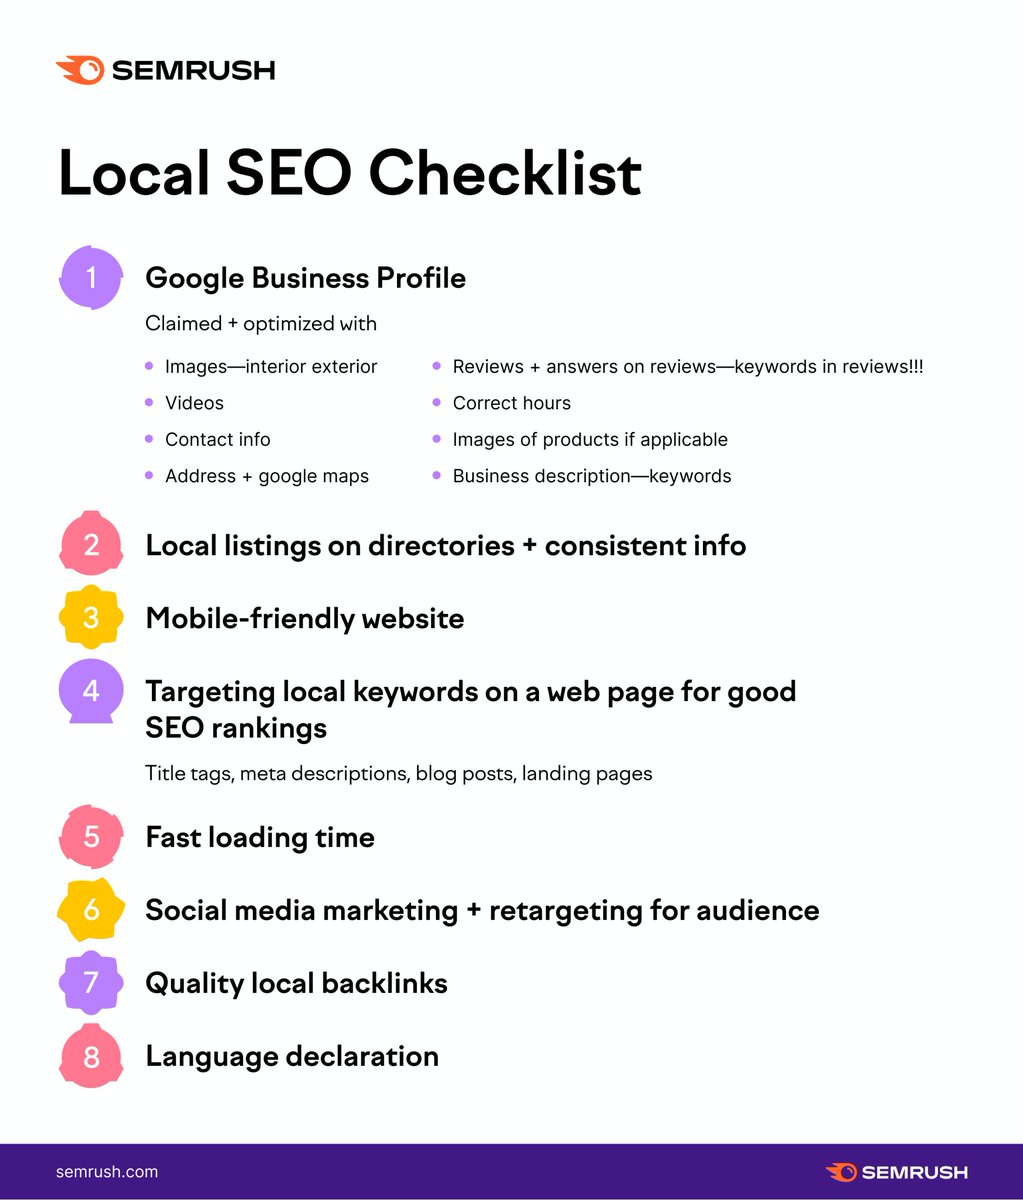 Local SEO Made Simple.✨ 

Struggling with local rankings? 

@semrush Local SEO Checklist simplifies the process for you. 

Optimize your website, manage your reputation, and stay ahead of the competition. 

Ready to dominate your local market?